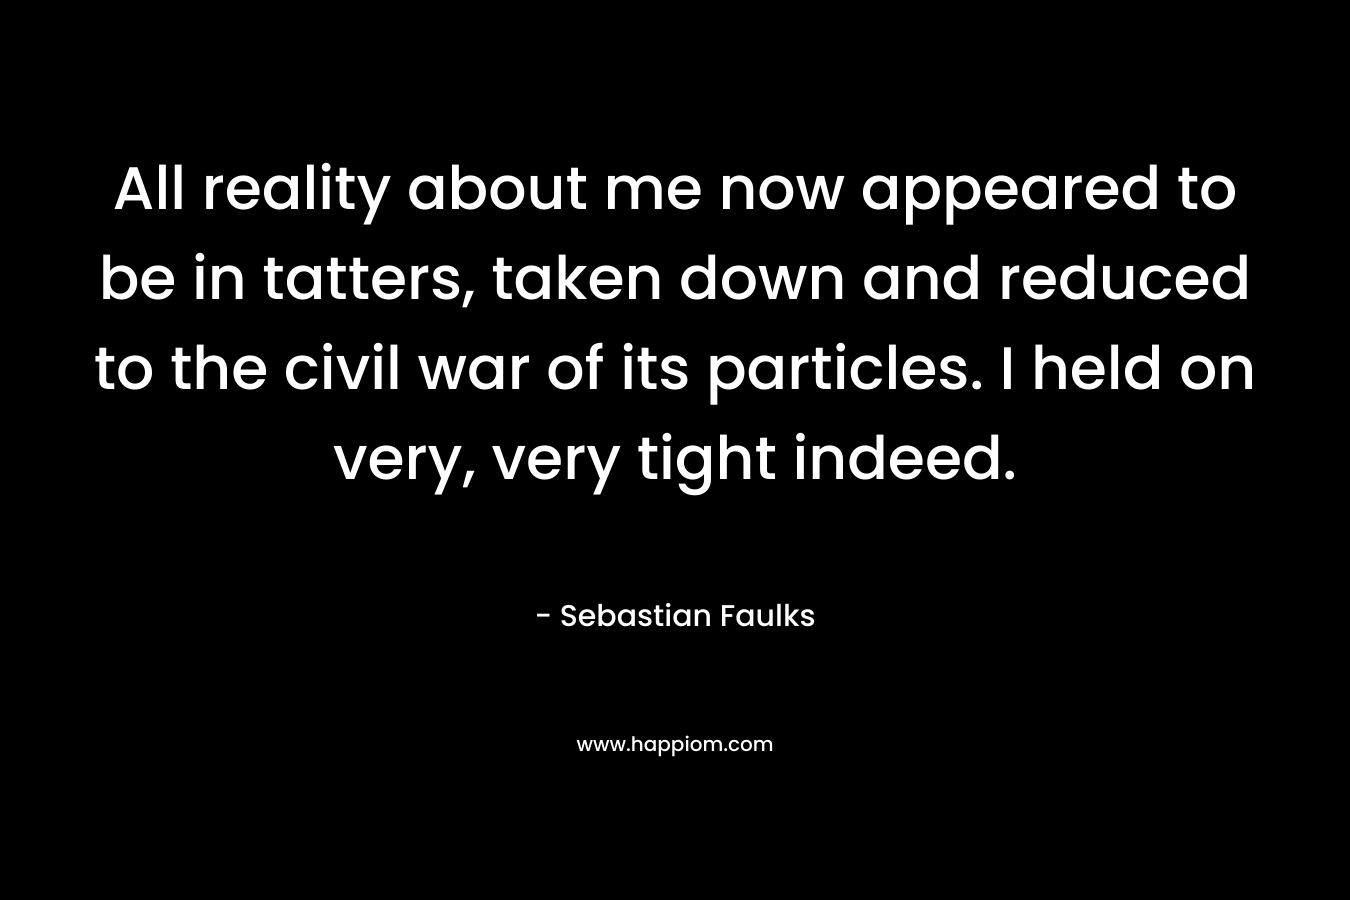 All reality about me now appeared to be in tatters, taken down and reduced to the civil war of its particles. I held on very, very tight indeed. – Sebastian Faulks